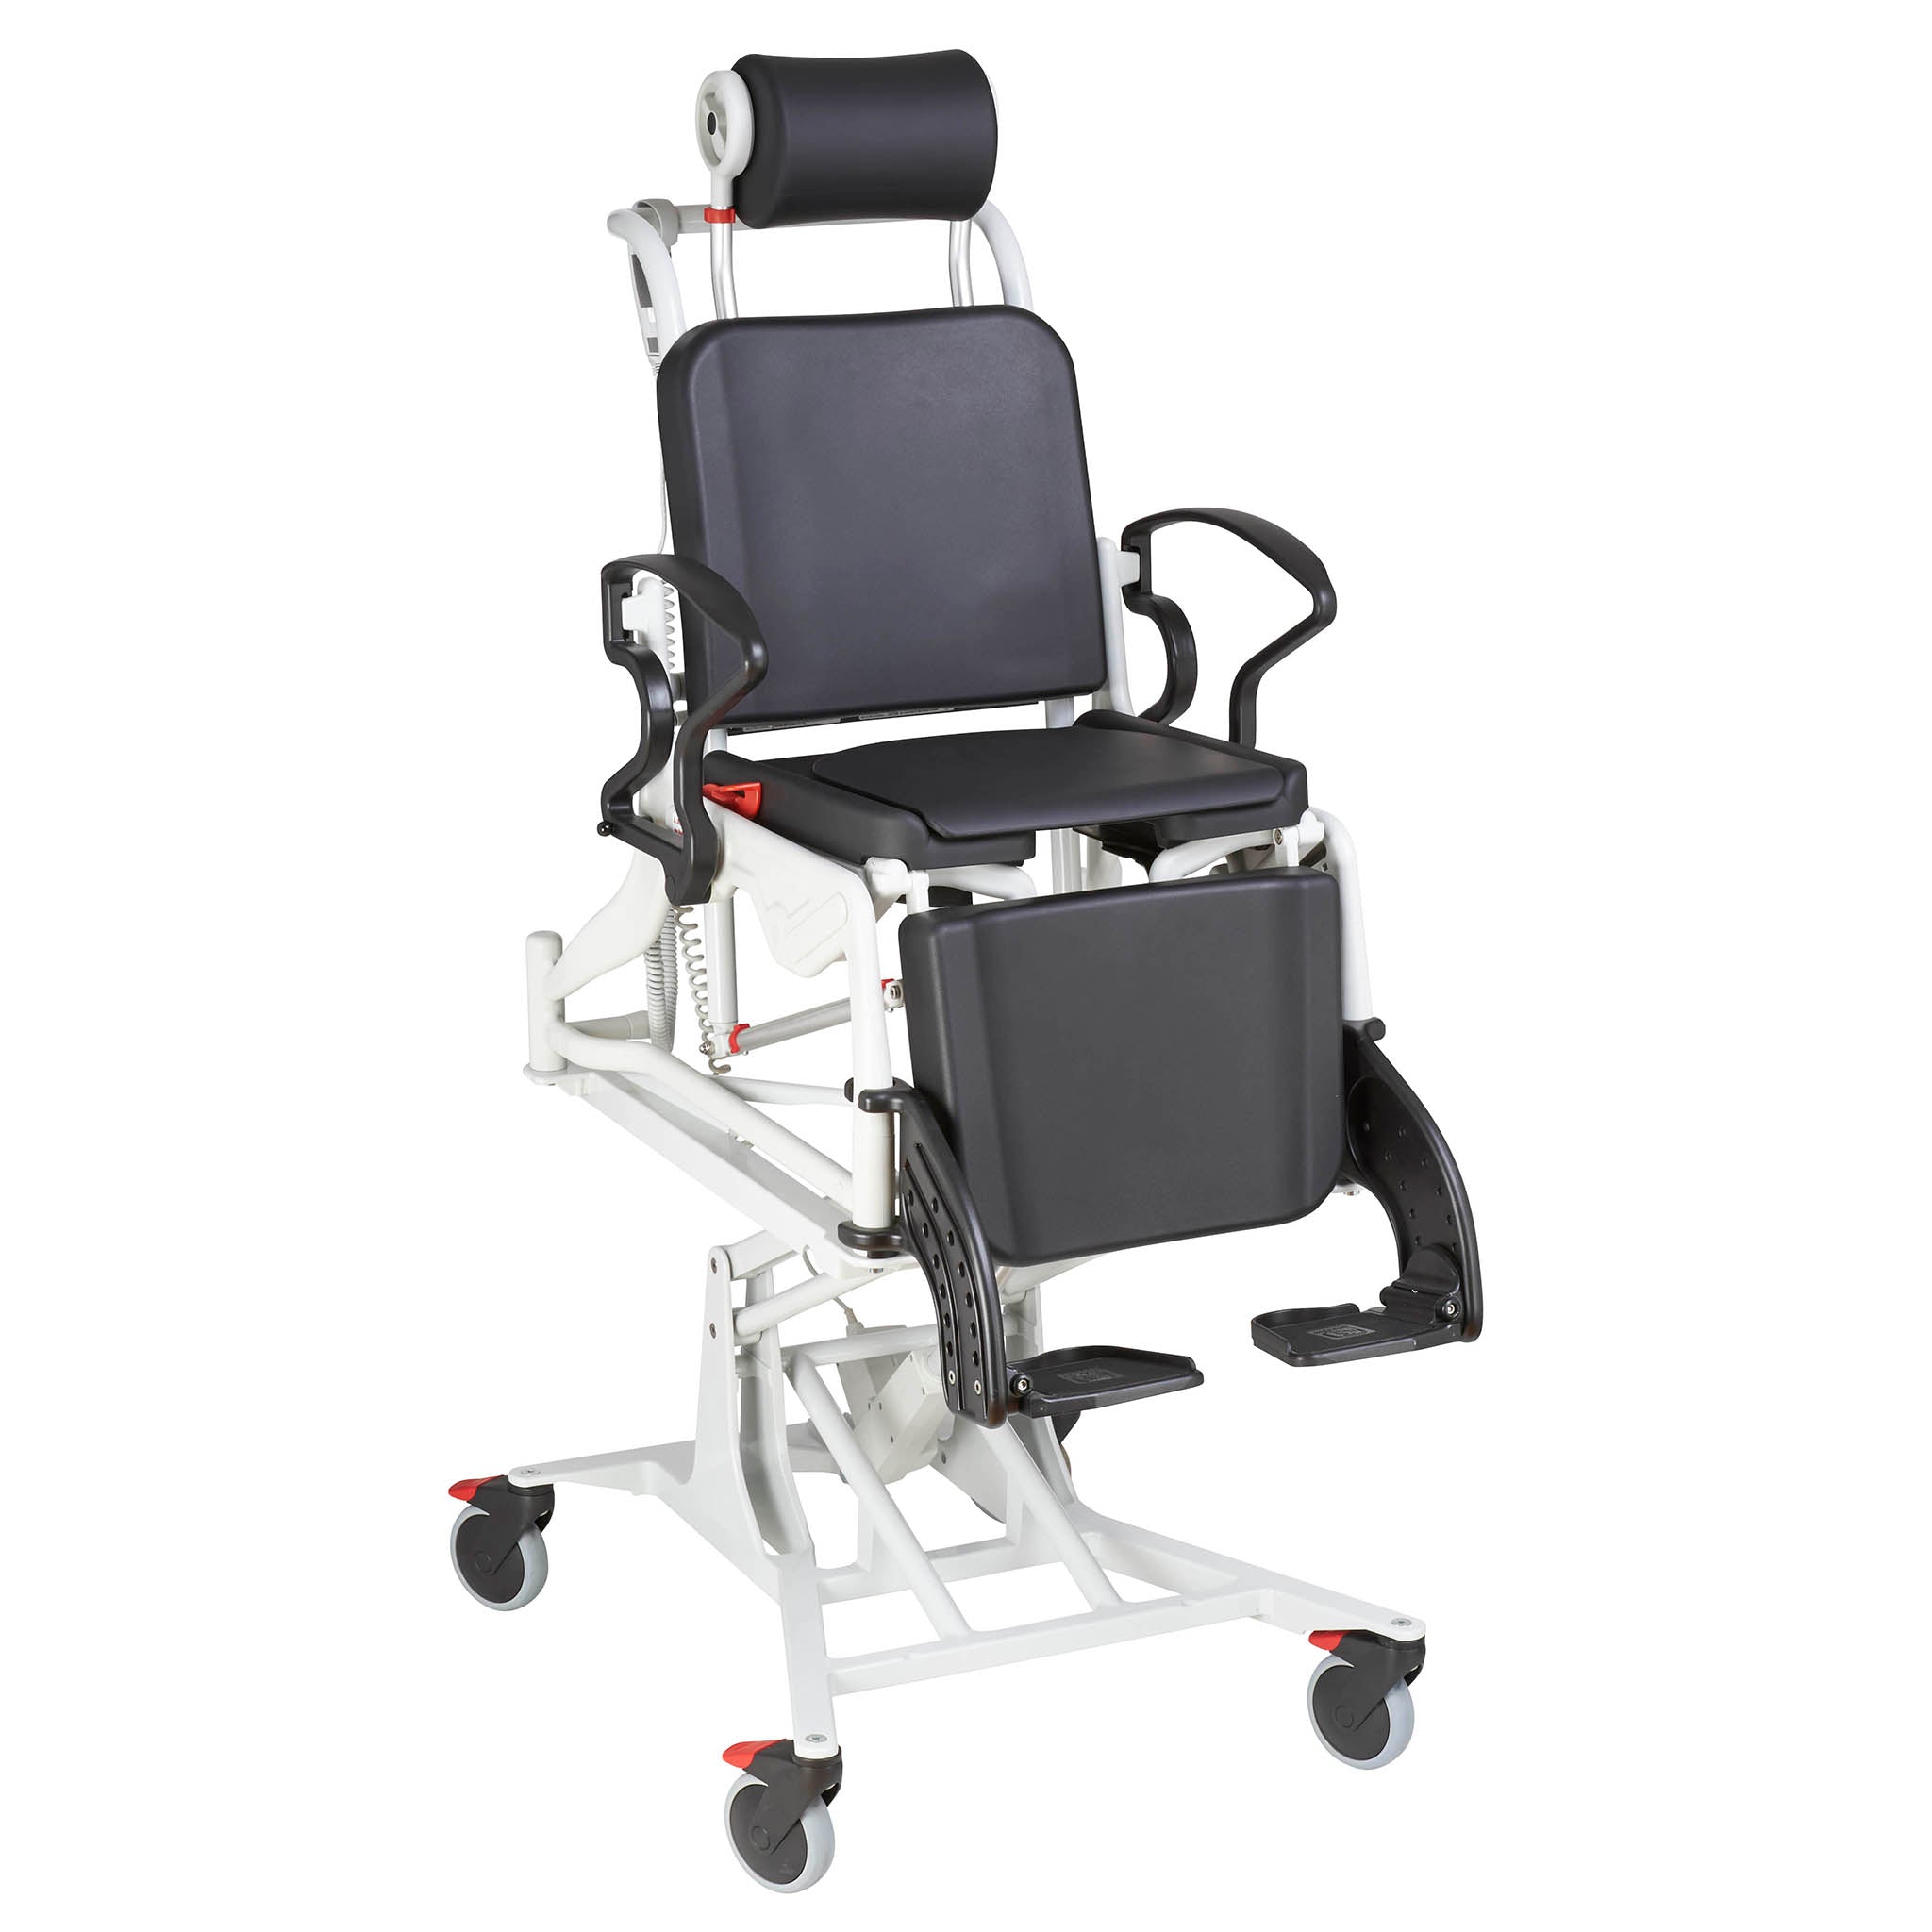 TR Equipment Rebotec Phoenix Electric Height Adjustable Reclining Commode/ Shower Chair